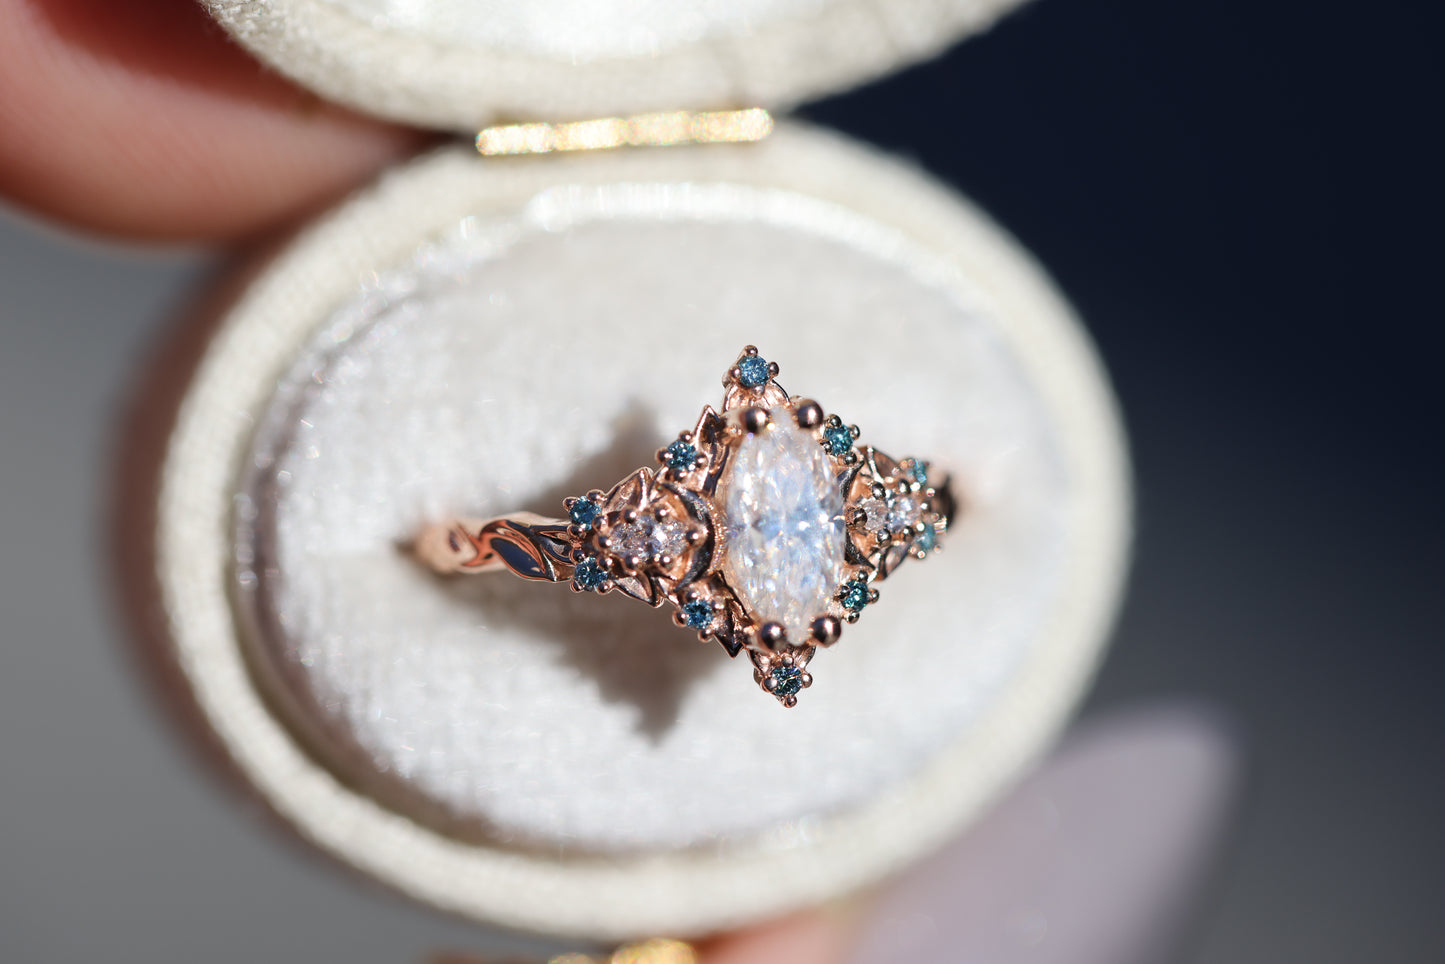 Briar moon with marquise moissanite center and aqua diamond accents